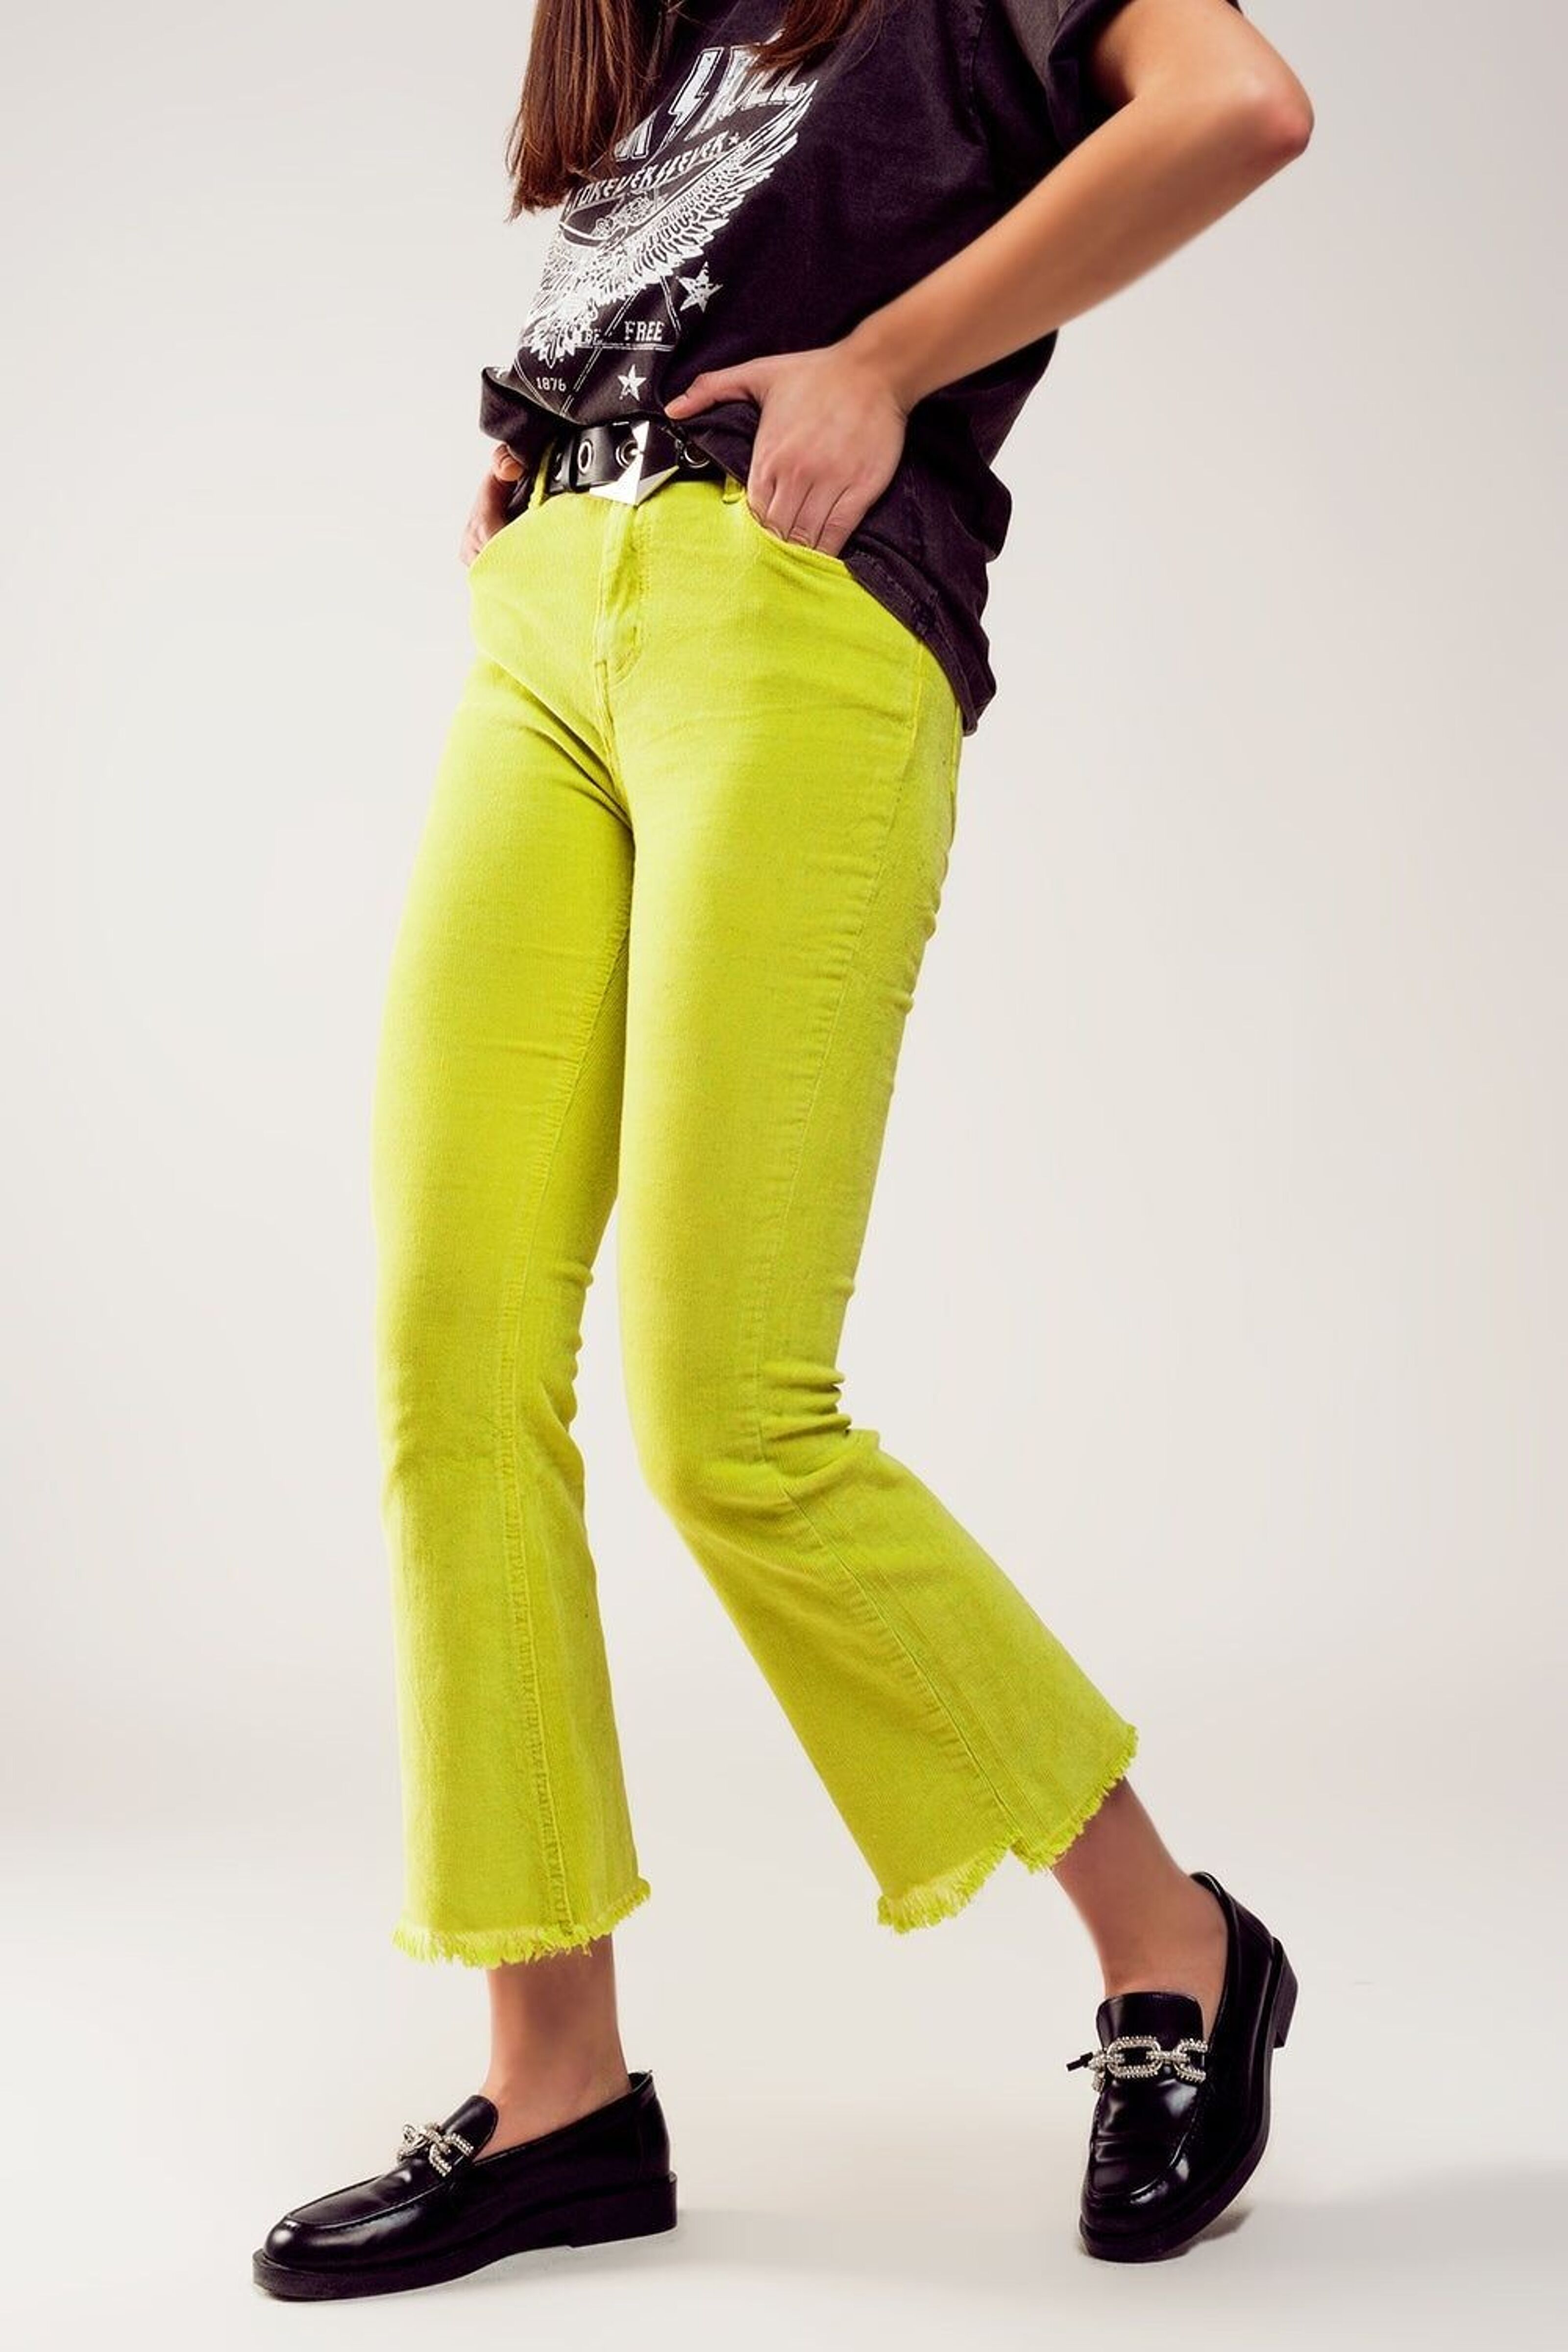 Buy wholesale Flare corduroy pants in lime green